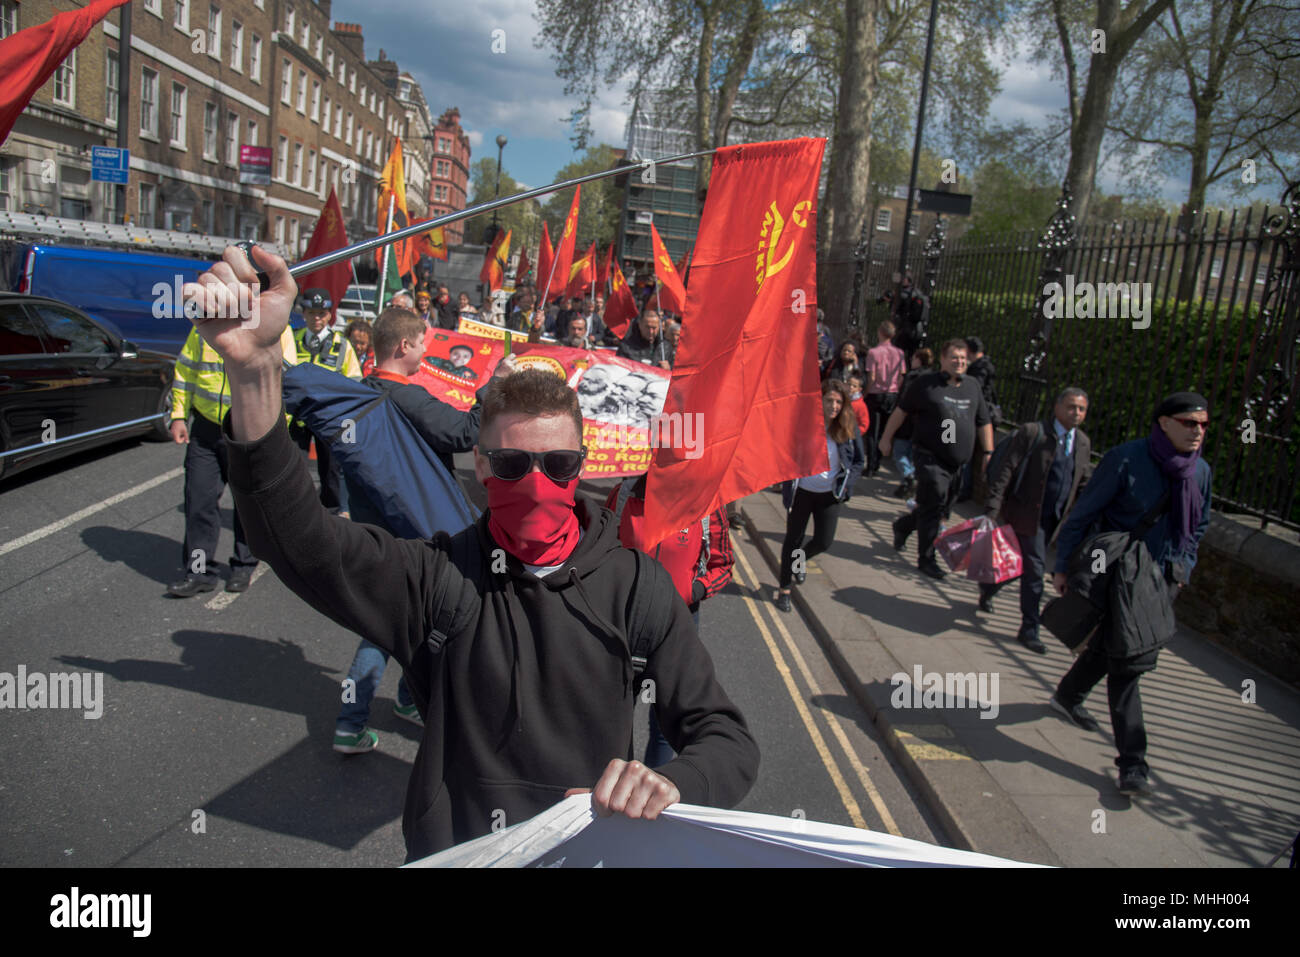 London, UK. 1st May, 2018. The annual May Day march and rally on May 1st, 2018 in London. Thousands of people joined in the London May Day March and Rally in Trafalgar square. Since 1890 May Day has been celebrated throughout the world as a day of working class solidarity. In many countries the events take place on May 1, but in Newcastle the march and rally has for many years been held on the Saturday of the early May bank holiday weekend. Credit: See Li/Alamy Live News Stock Photo